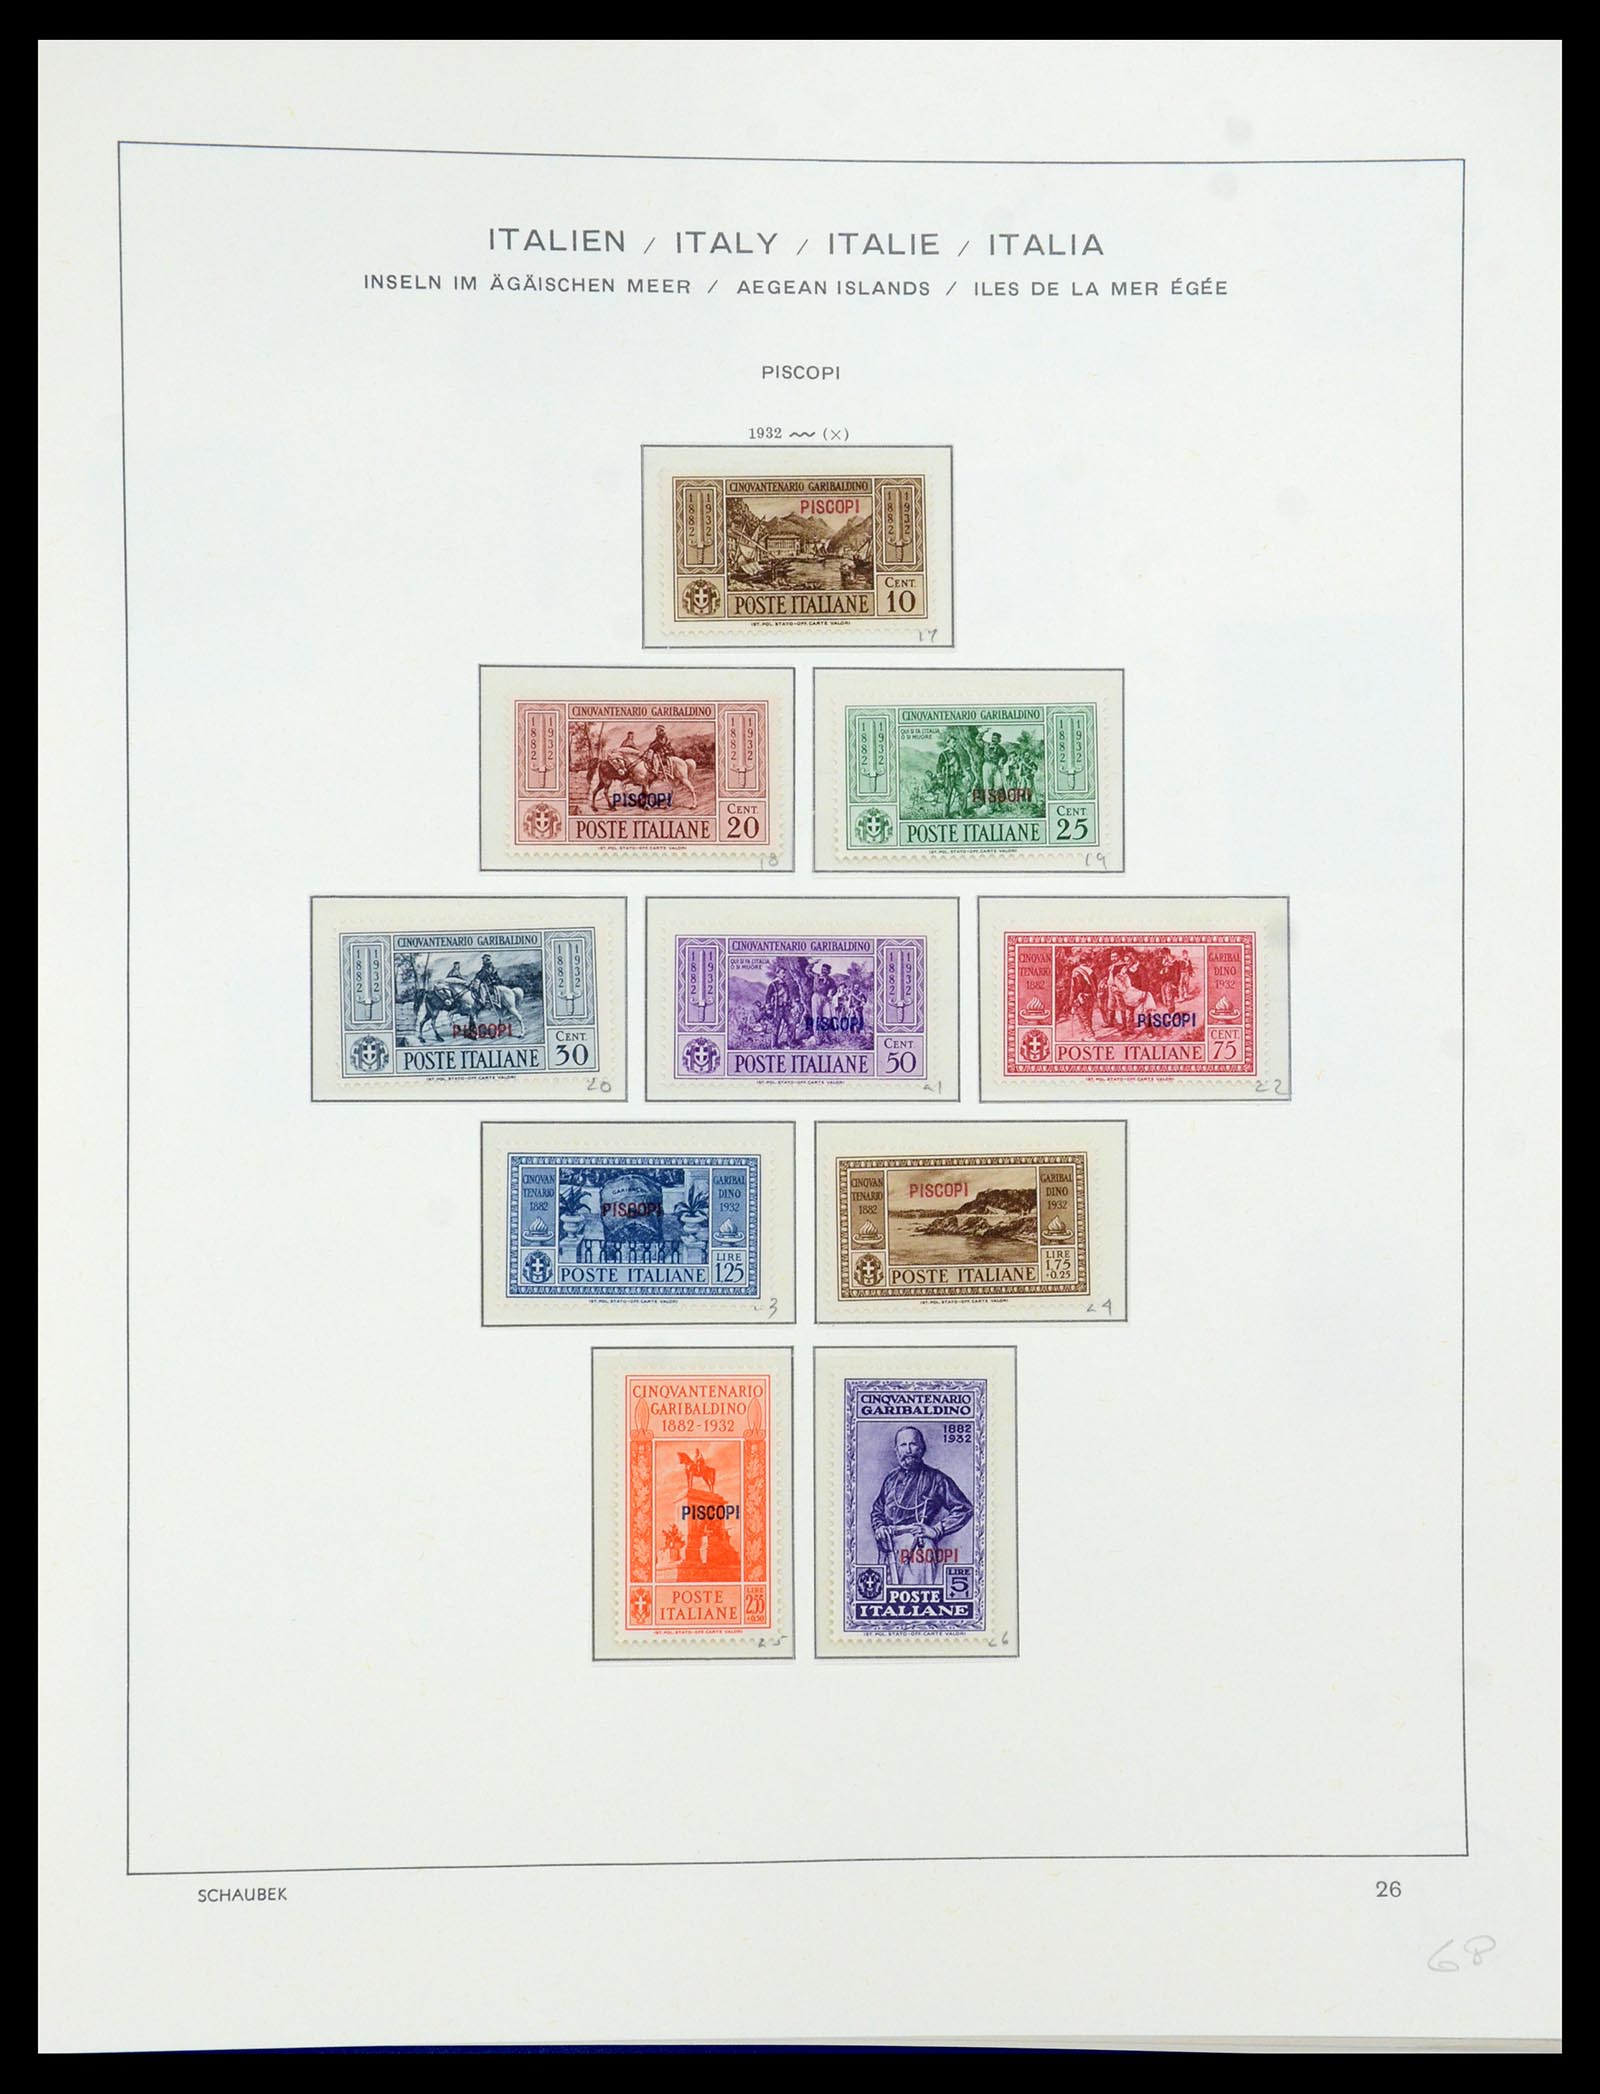 36181 033 - Stamp collection 36181 Italian Aegean Islands 1912-1941.